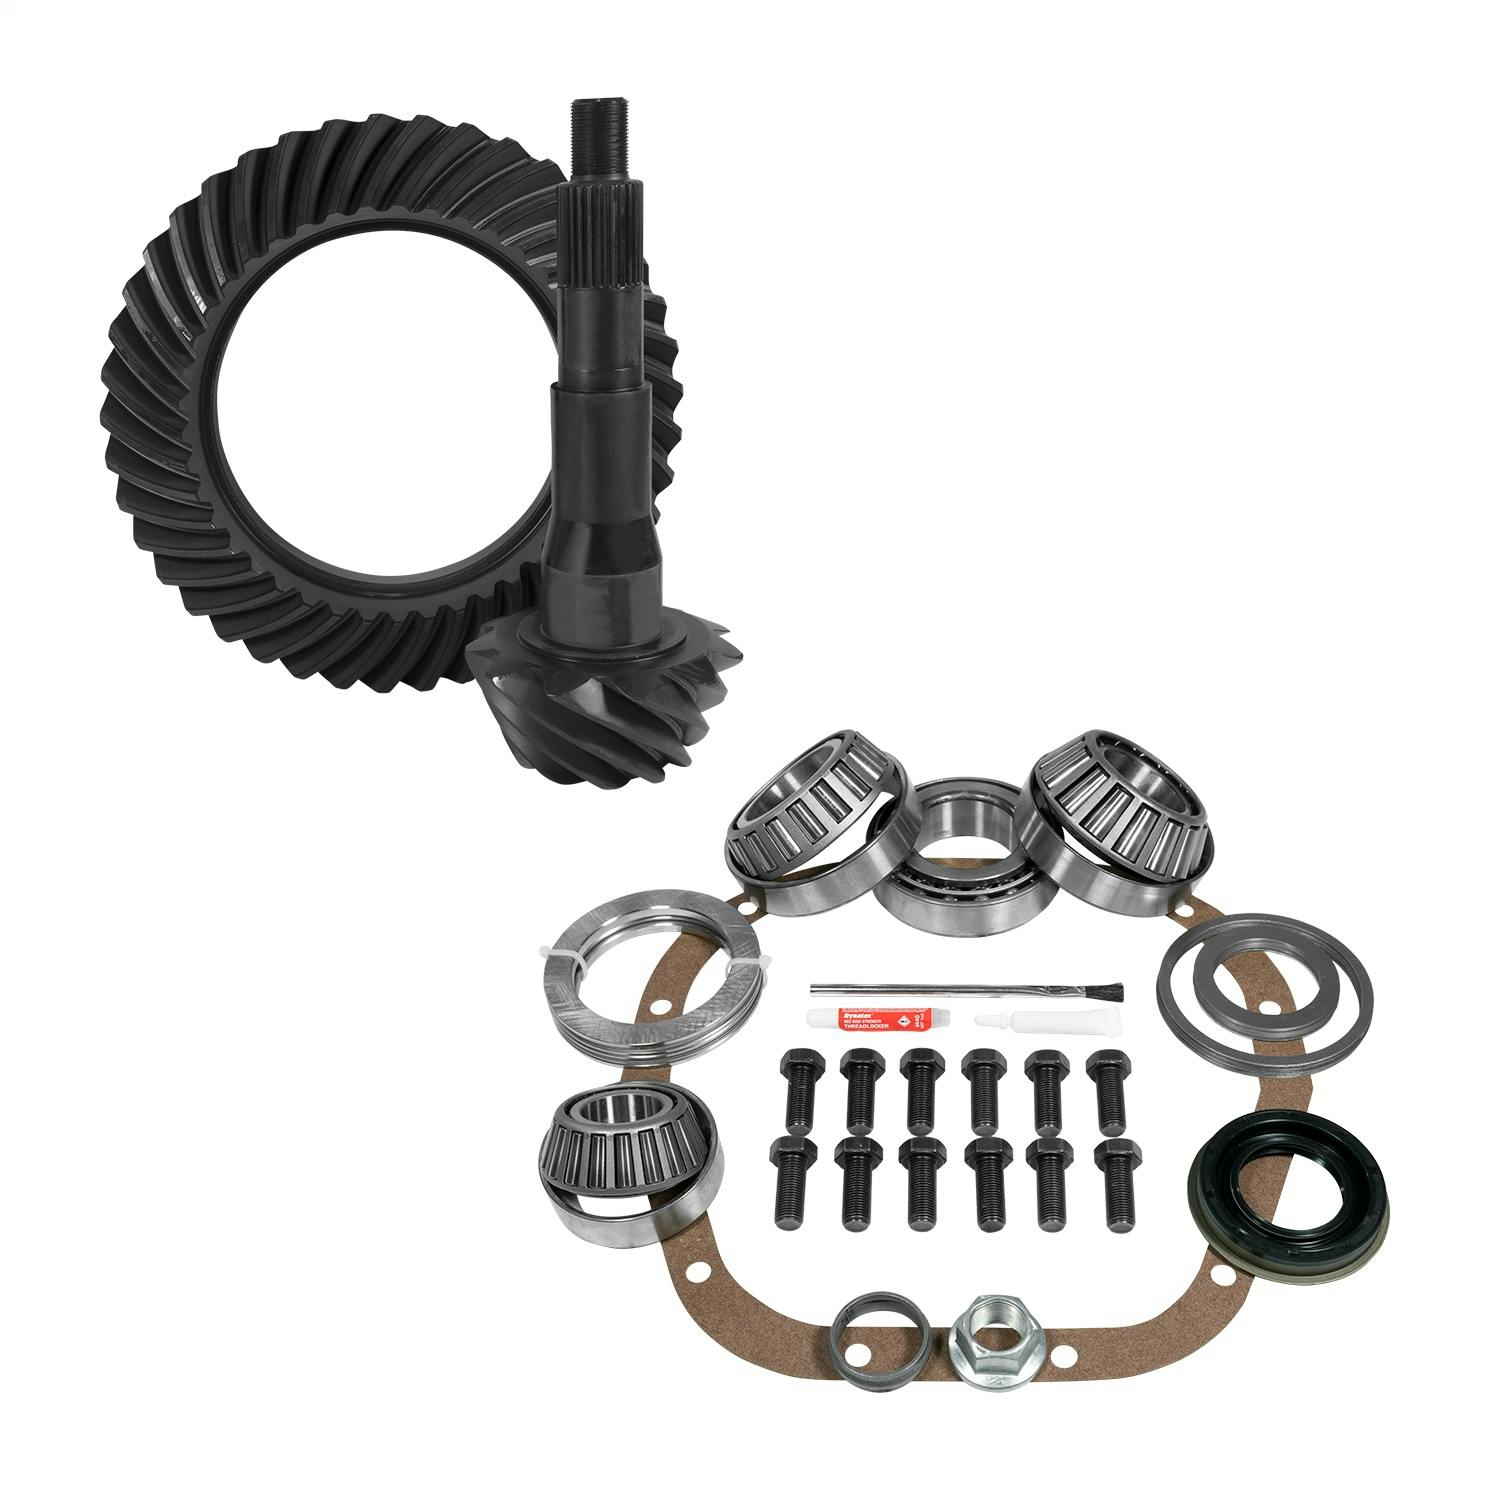 USA Standard Gear ZGK2135 10.5in. Ford 3.73 Rear Ring/Pinion and Install Kit